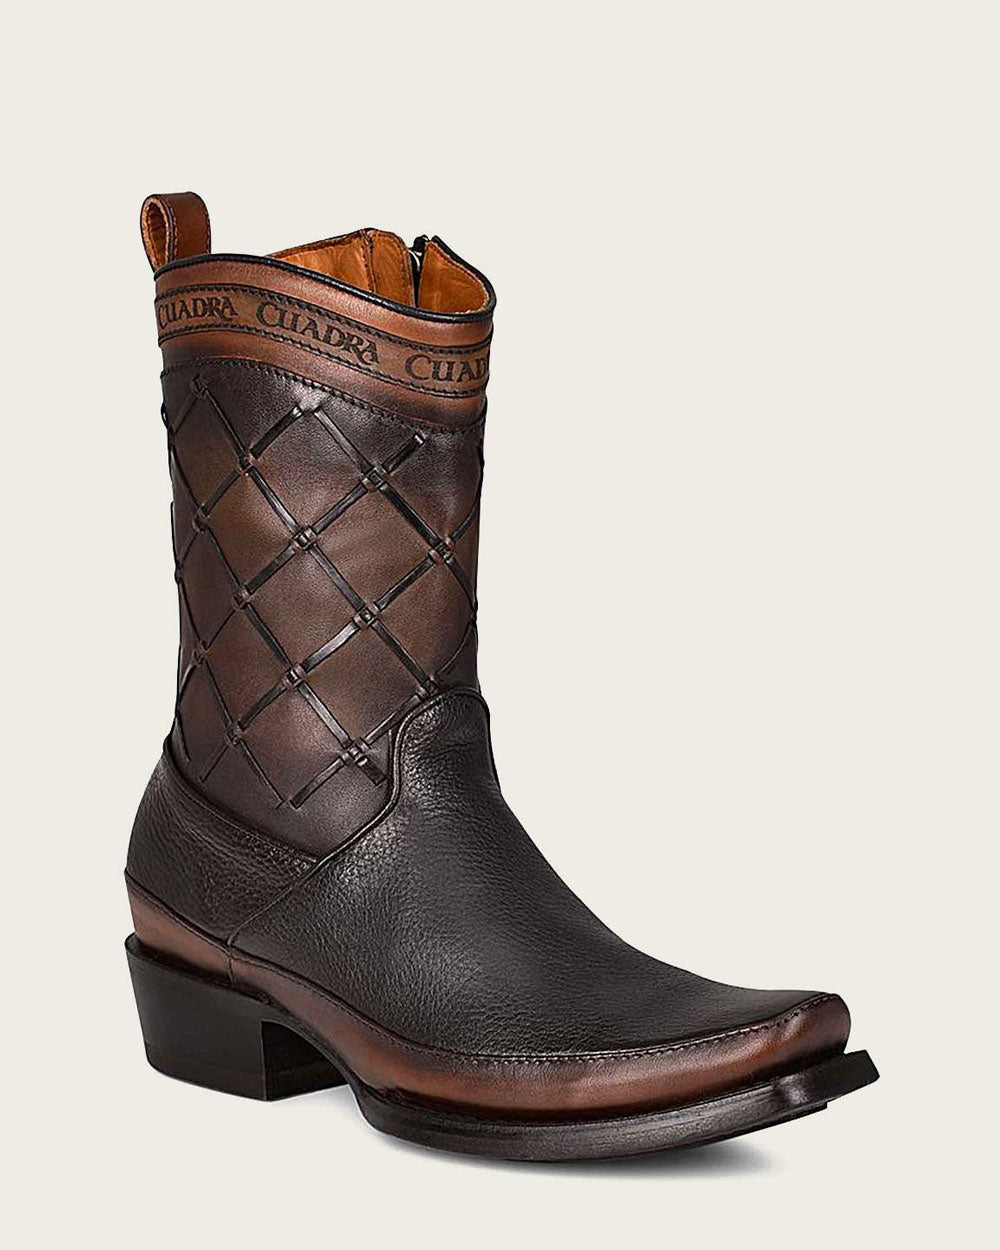 Black Leather Boots by Cuadra: Premium, hand-painted and engraved boots for the discerning gentleman.